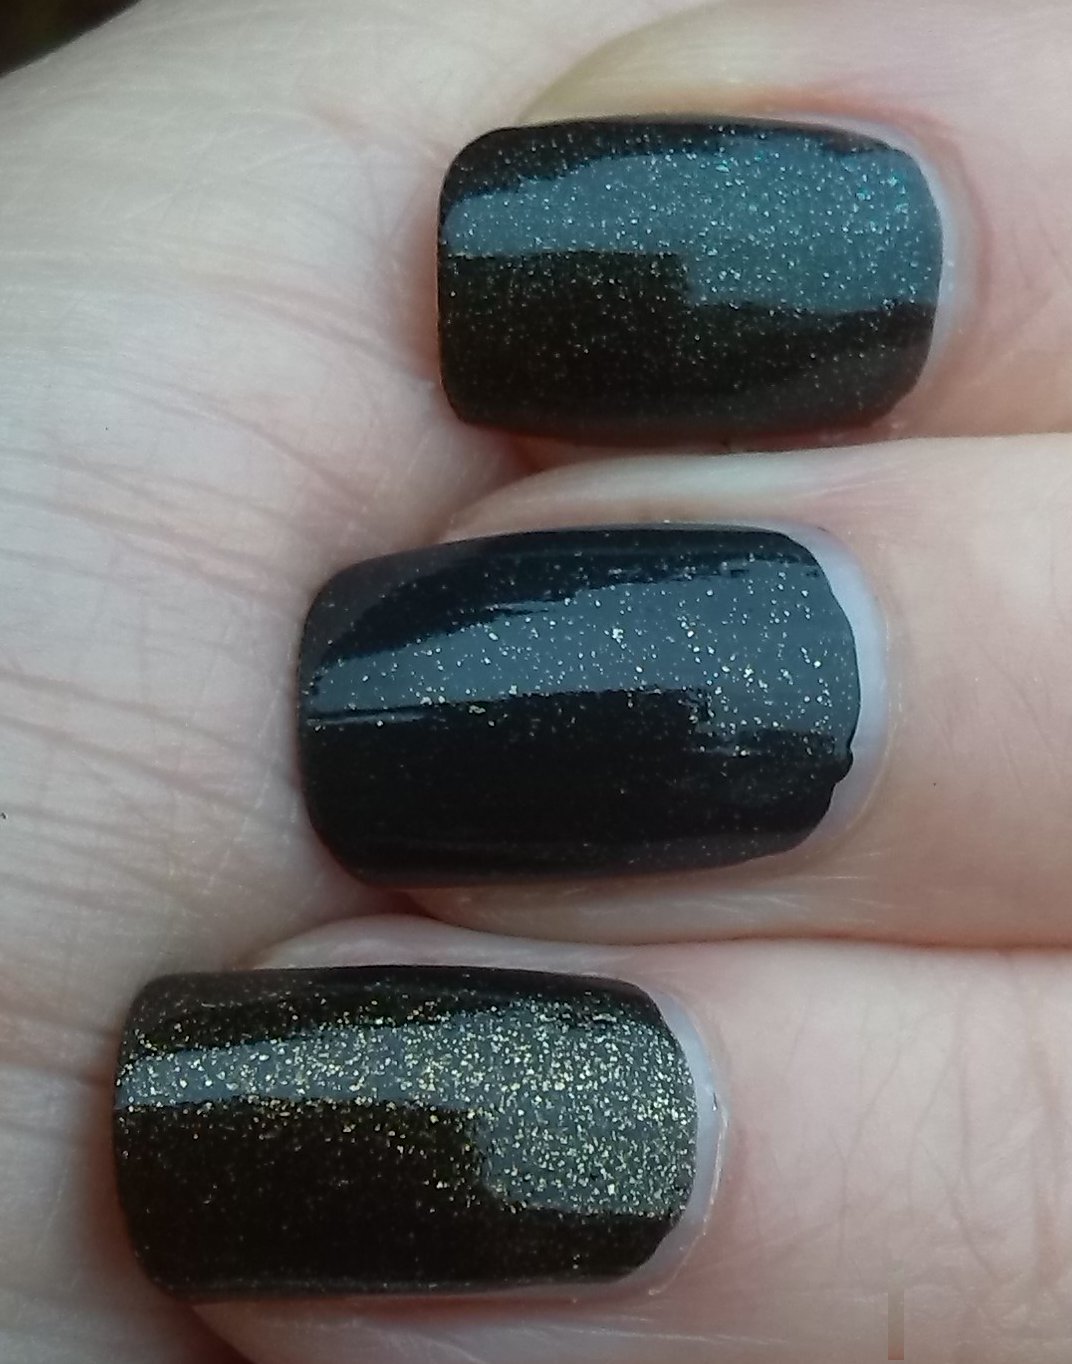 ATC Slitheen,  OPI Live and Let Die,  AE Beauty Never Fails